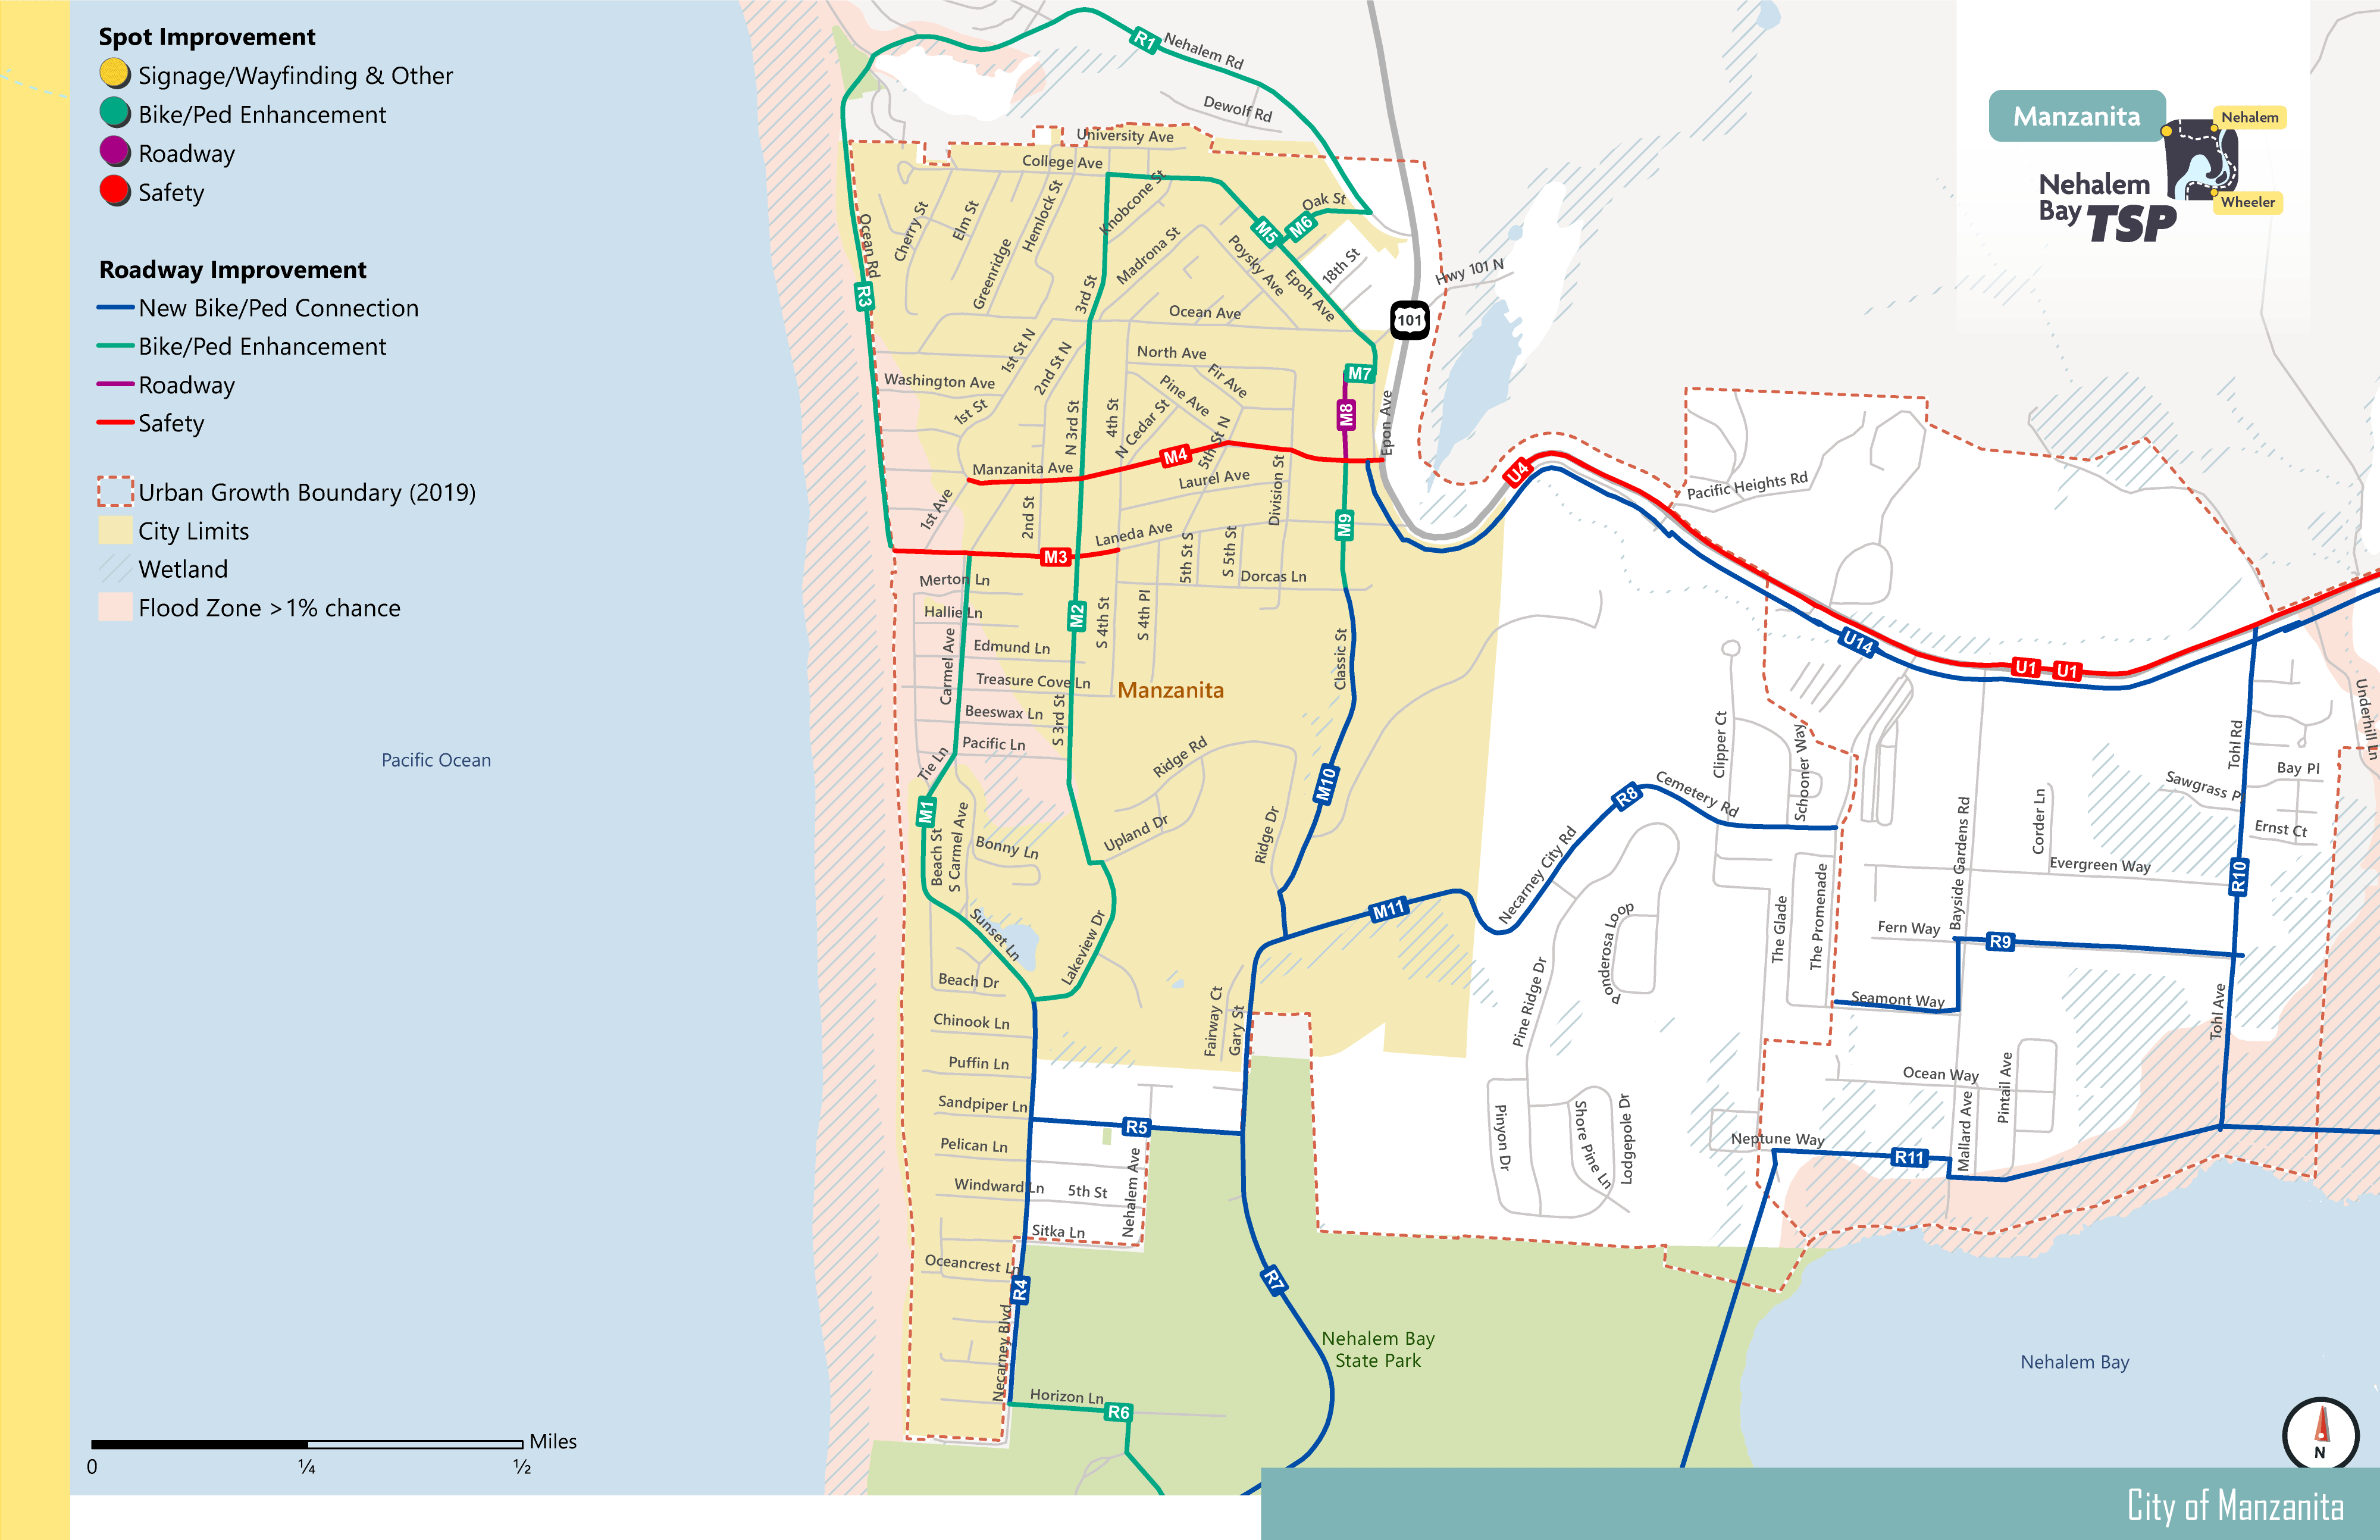 Map showing proposed projects in Manzanita